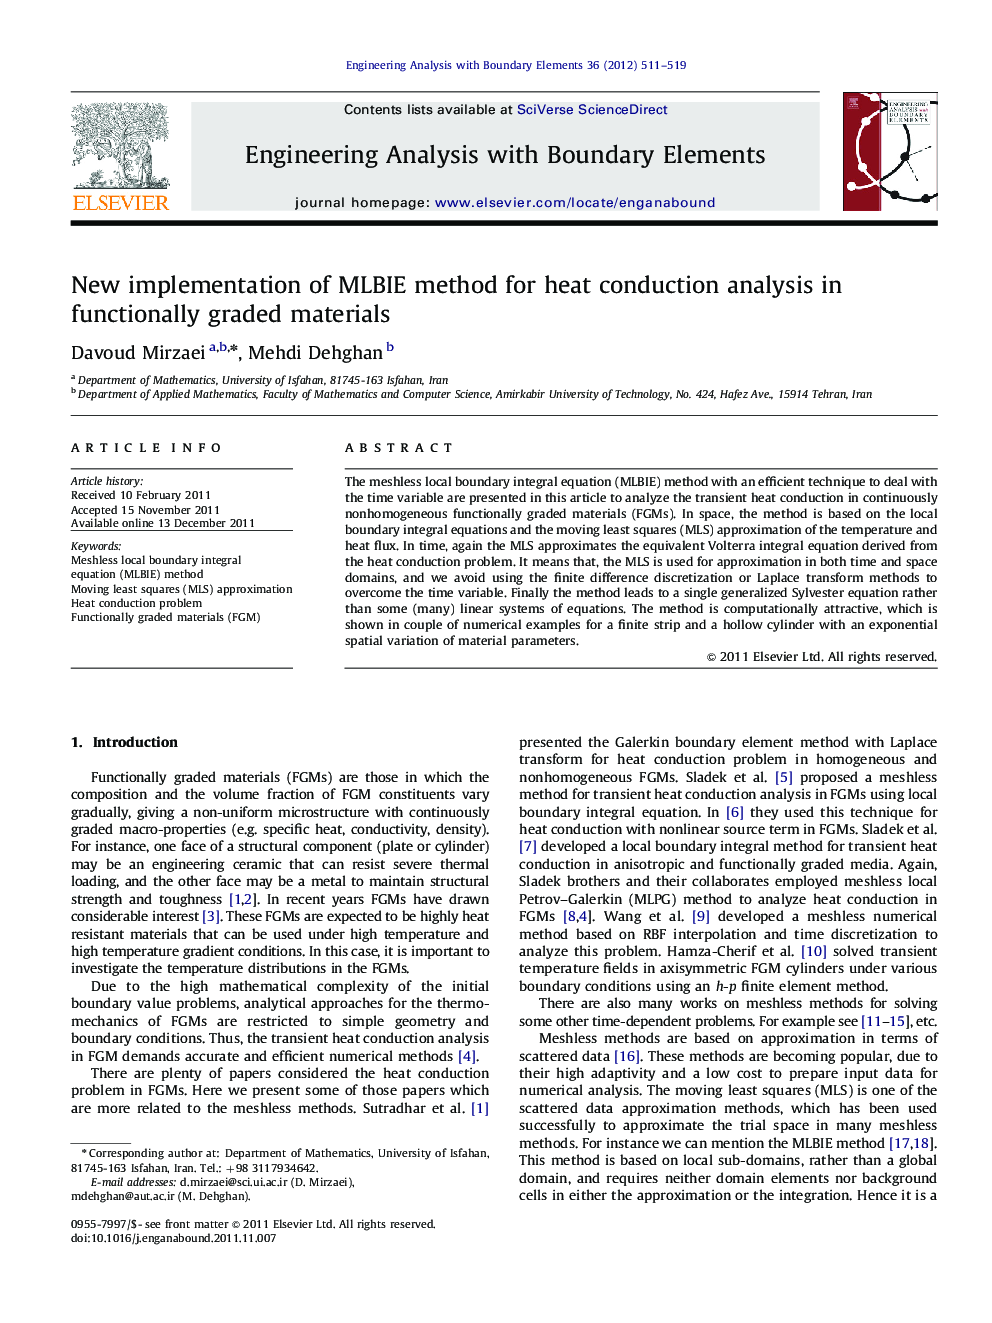 New implementation of MLBIE method for heat conduction analysis in functionally graded materials